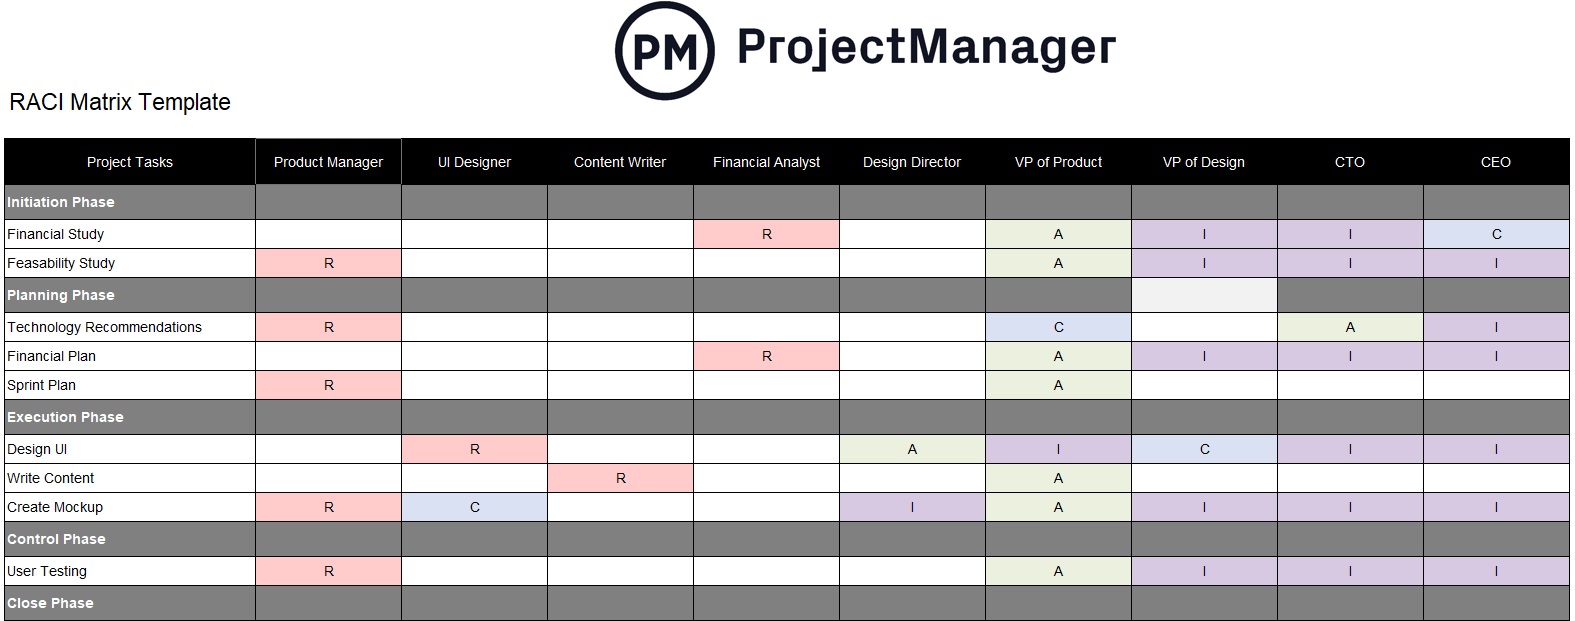 RACI matrix template in ProjectManager